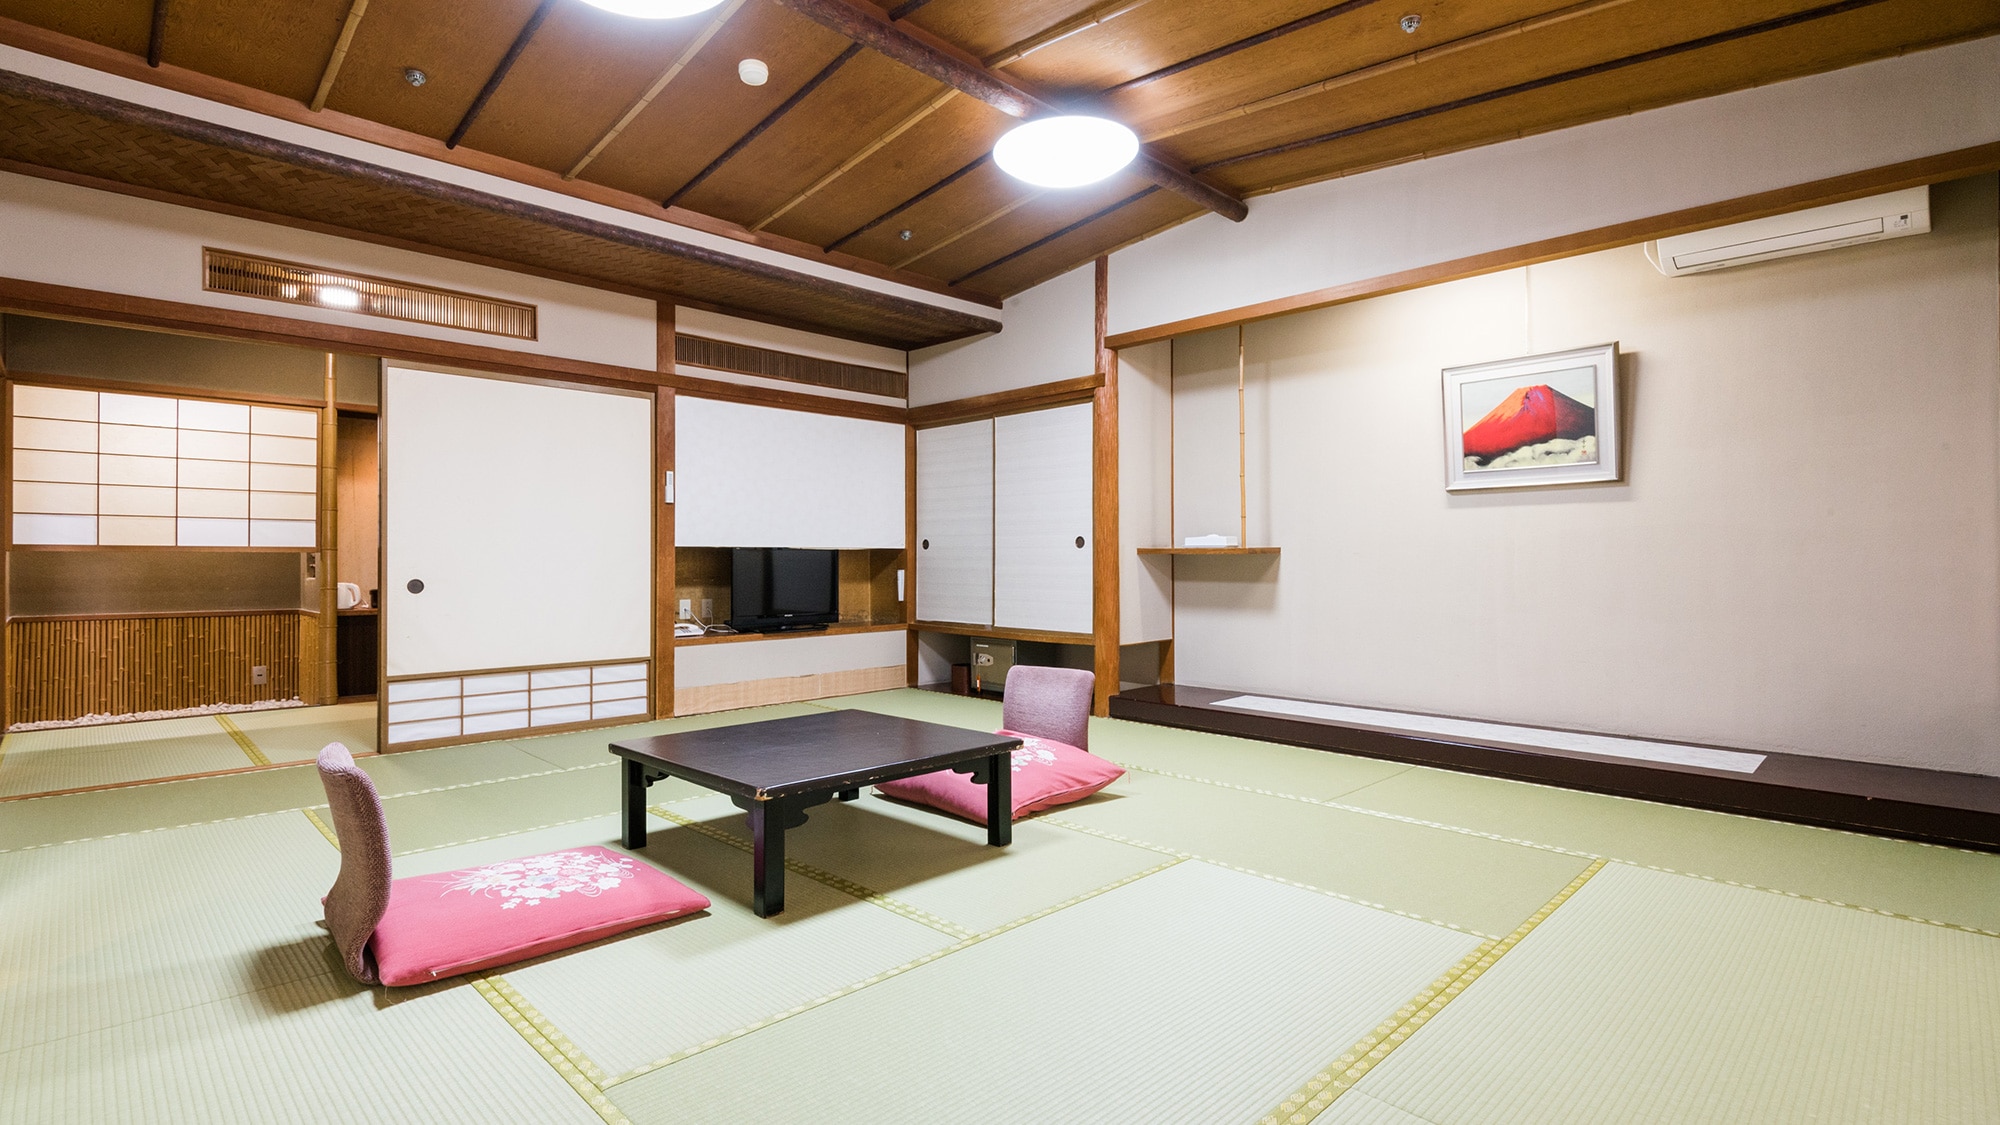 [Non-smoking] Japanese-style room 15 tatami mats + 10 tatami mats (no bath) *Photos are for illustrative purposes only as the room is under renovation.